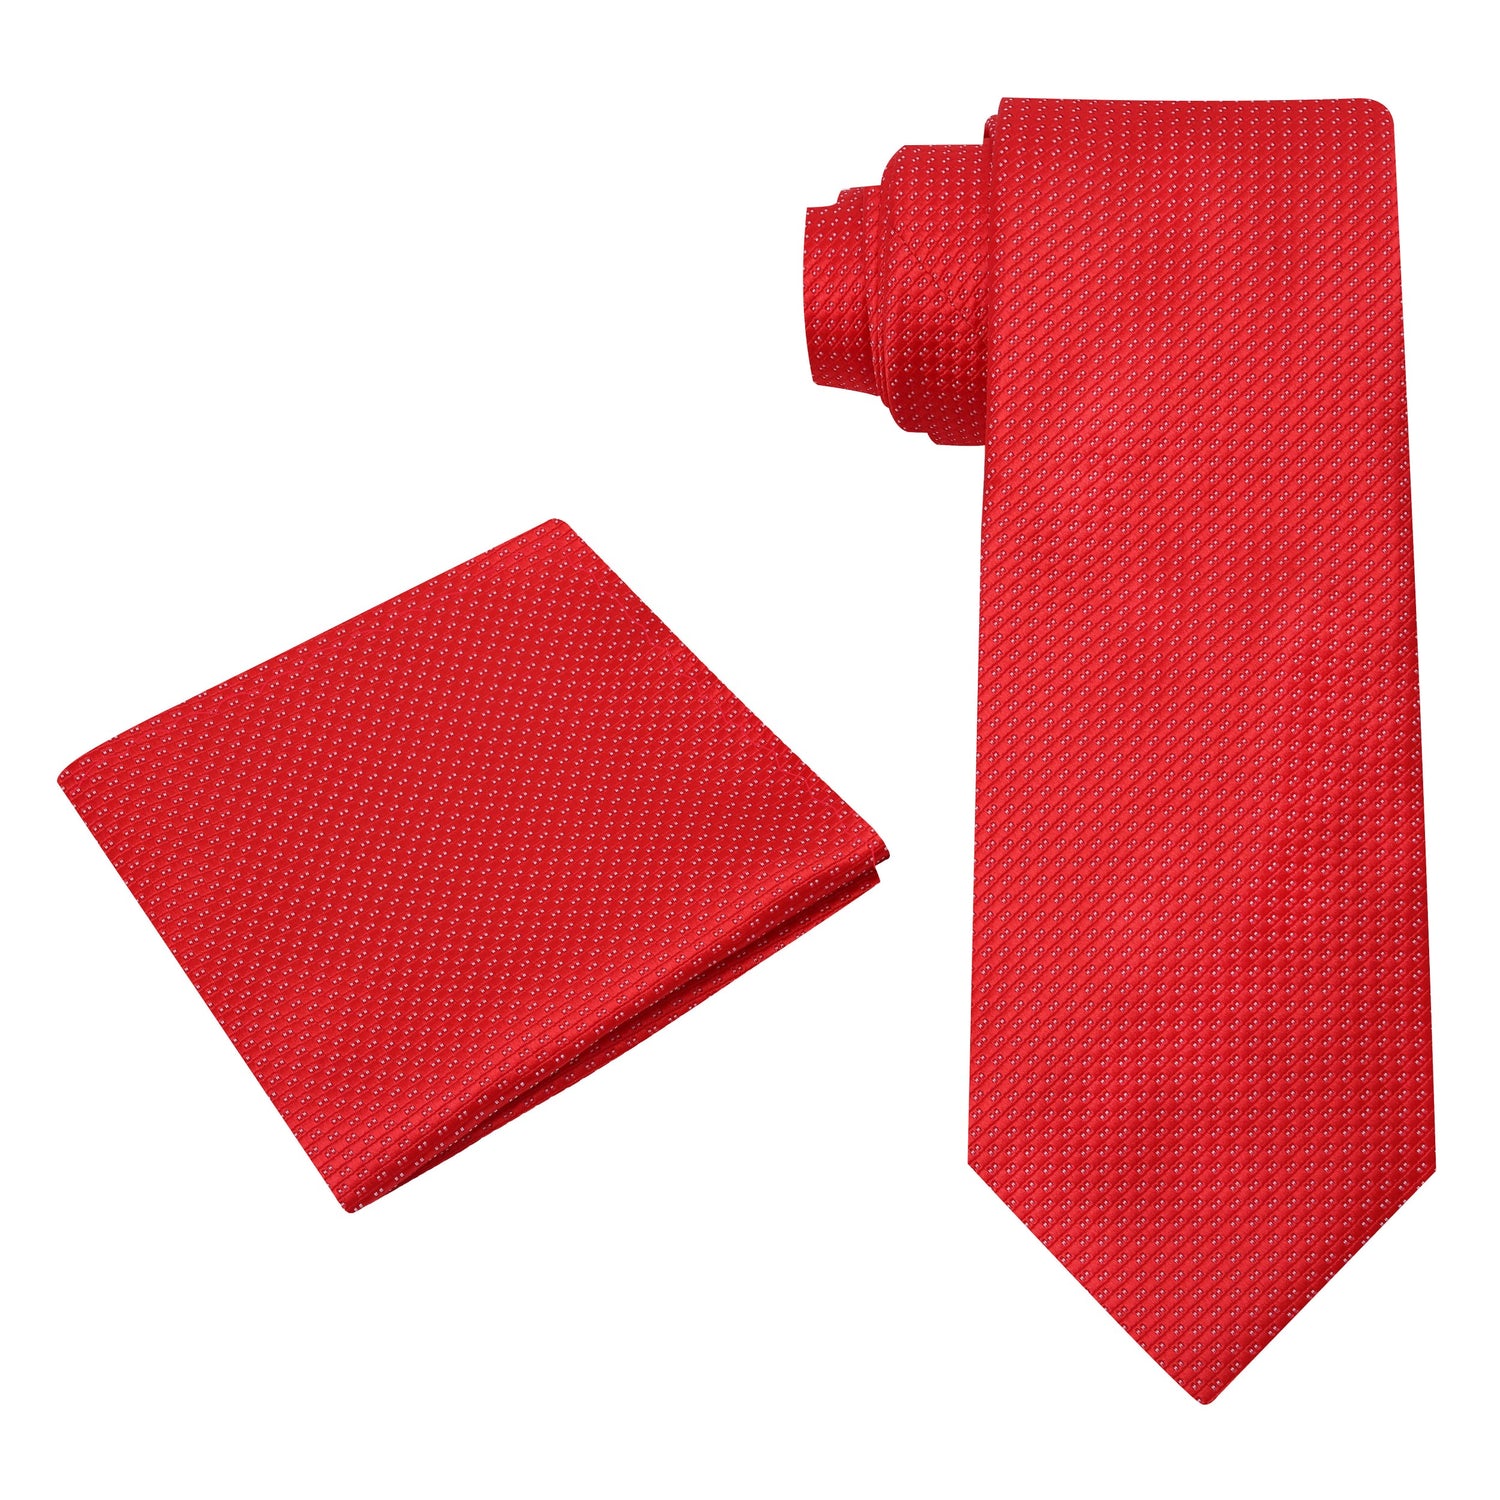 Alt view: Red with White Dots Tie and Pocket Square